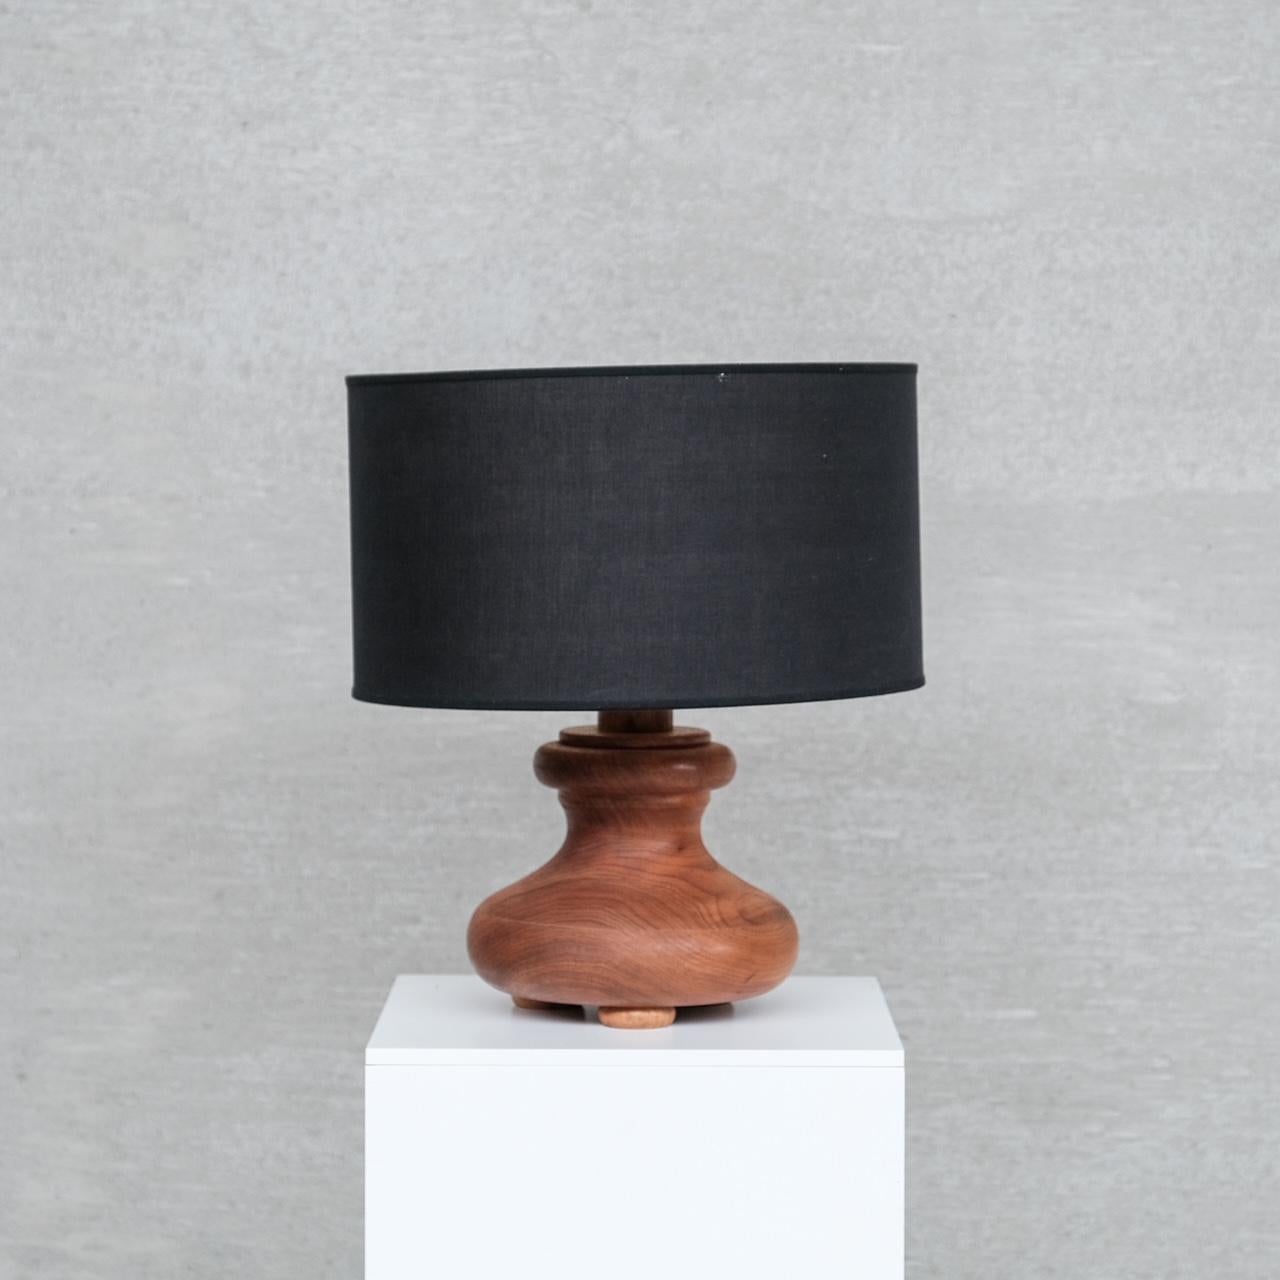 A chunky wooden table lamp. 

Italy, c1980s. 

Paired with original black shade. 

Good condition generally, some scuffs commensurate with age.

Since re-wired and PAT tested. 

PRICES ARE EXCLUSIVE OF VAT IF SOLD IN THE UK. 

Internal ref: